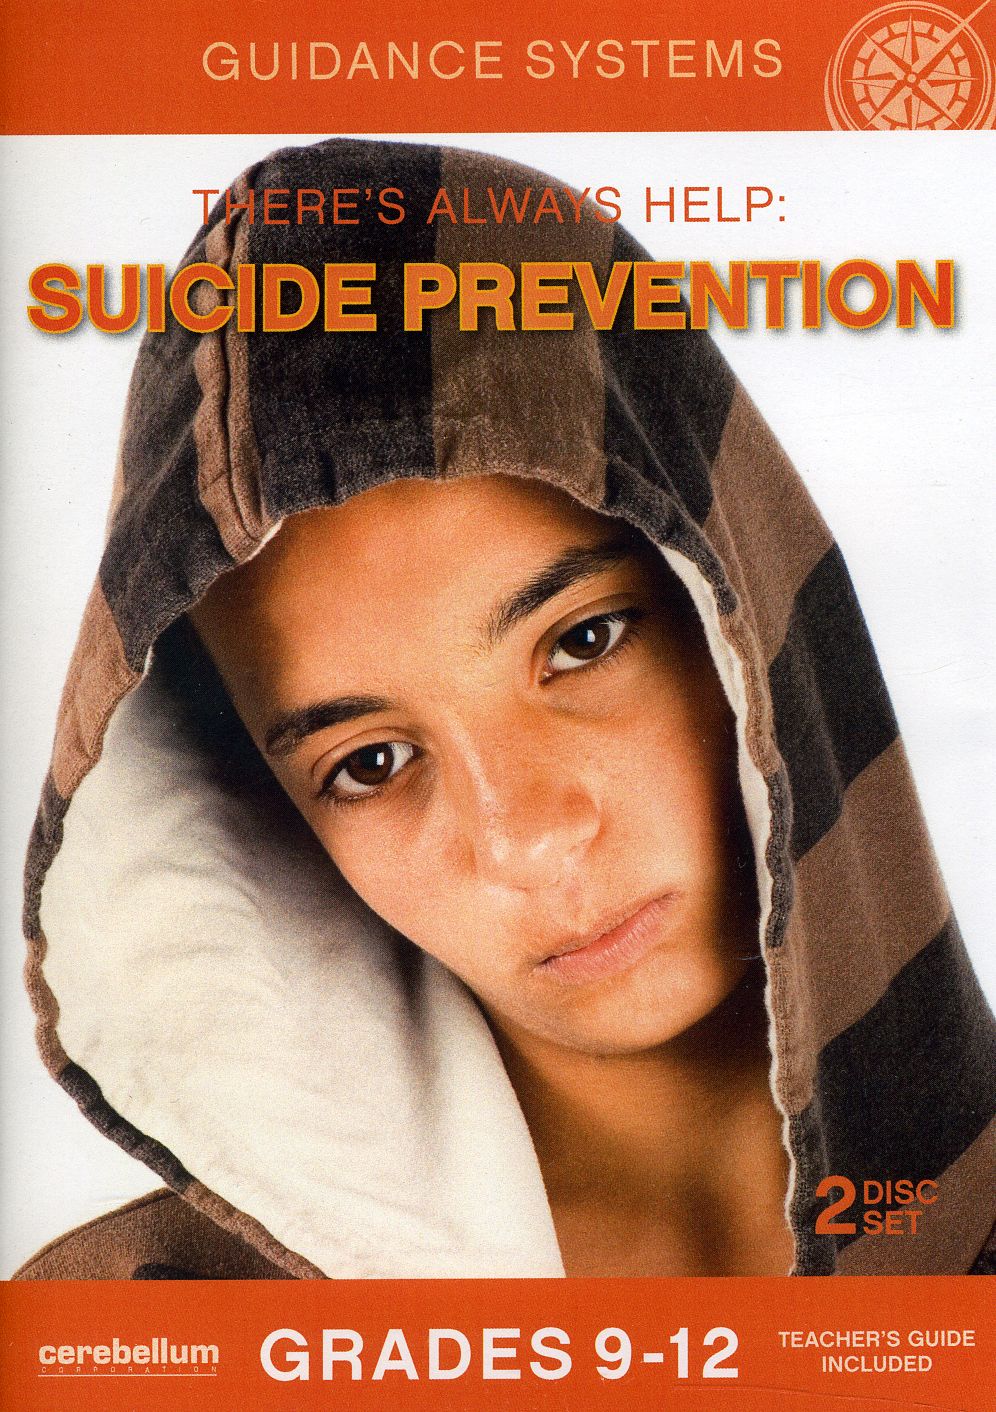 THERE'S ALWAYS HELP: SUICIDE PREVENTION (2PC)